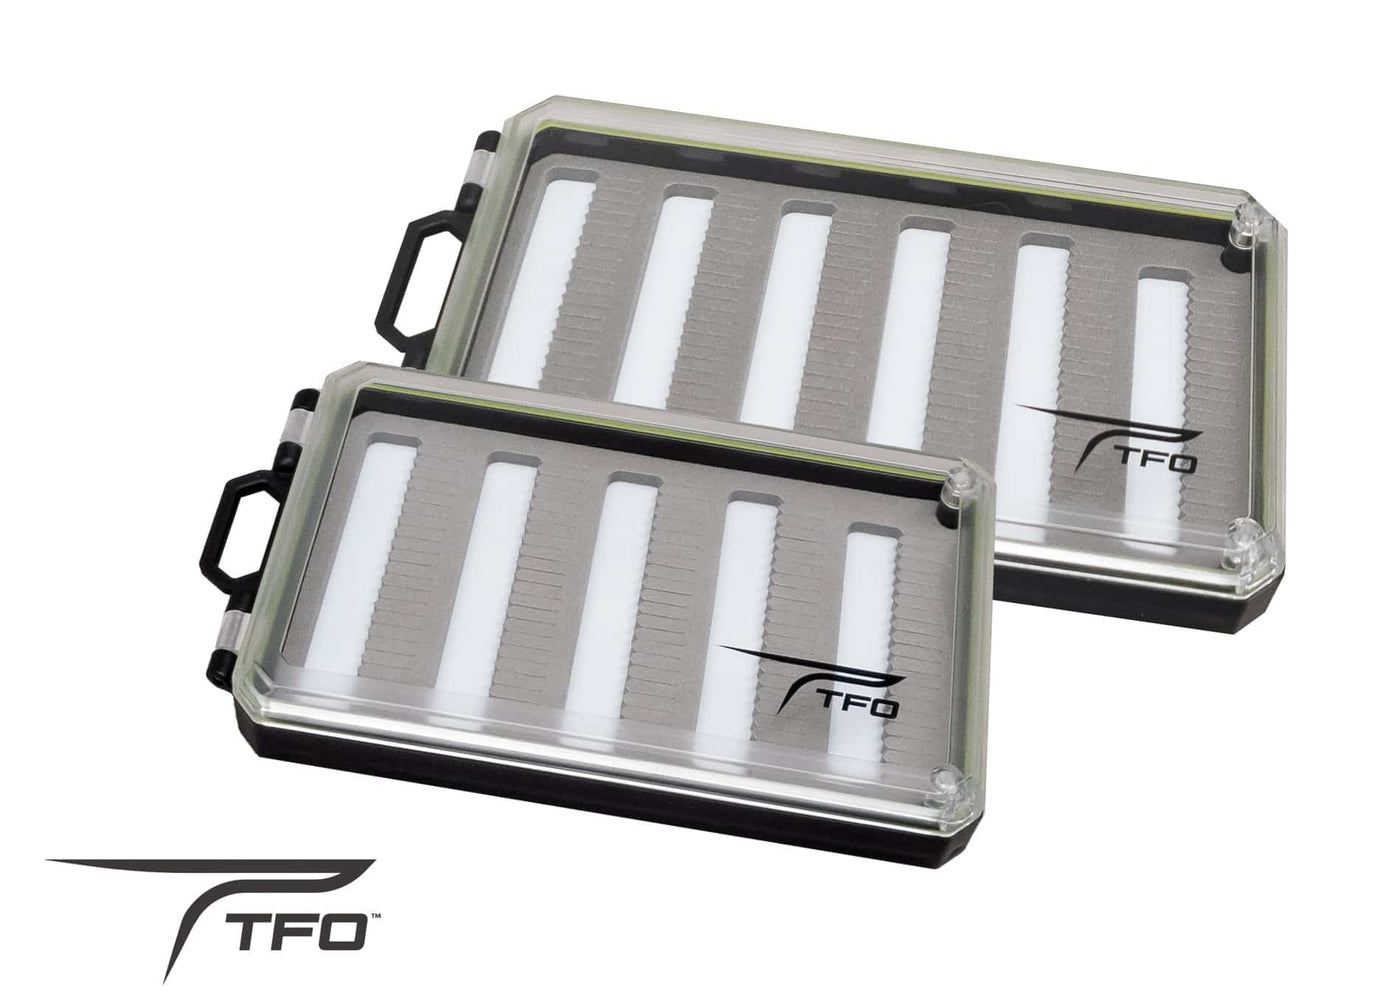 TFO Magnet Latch Fly Box